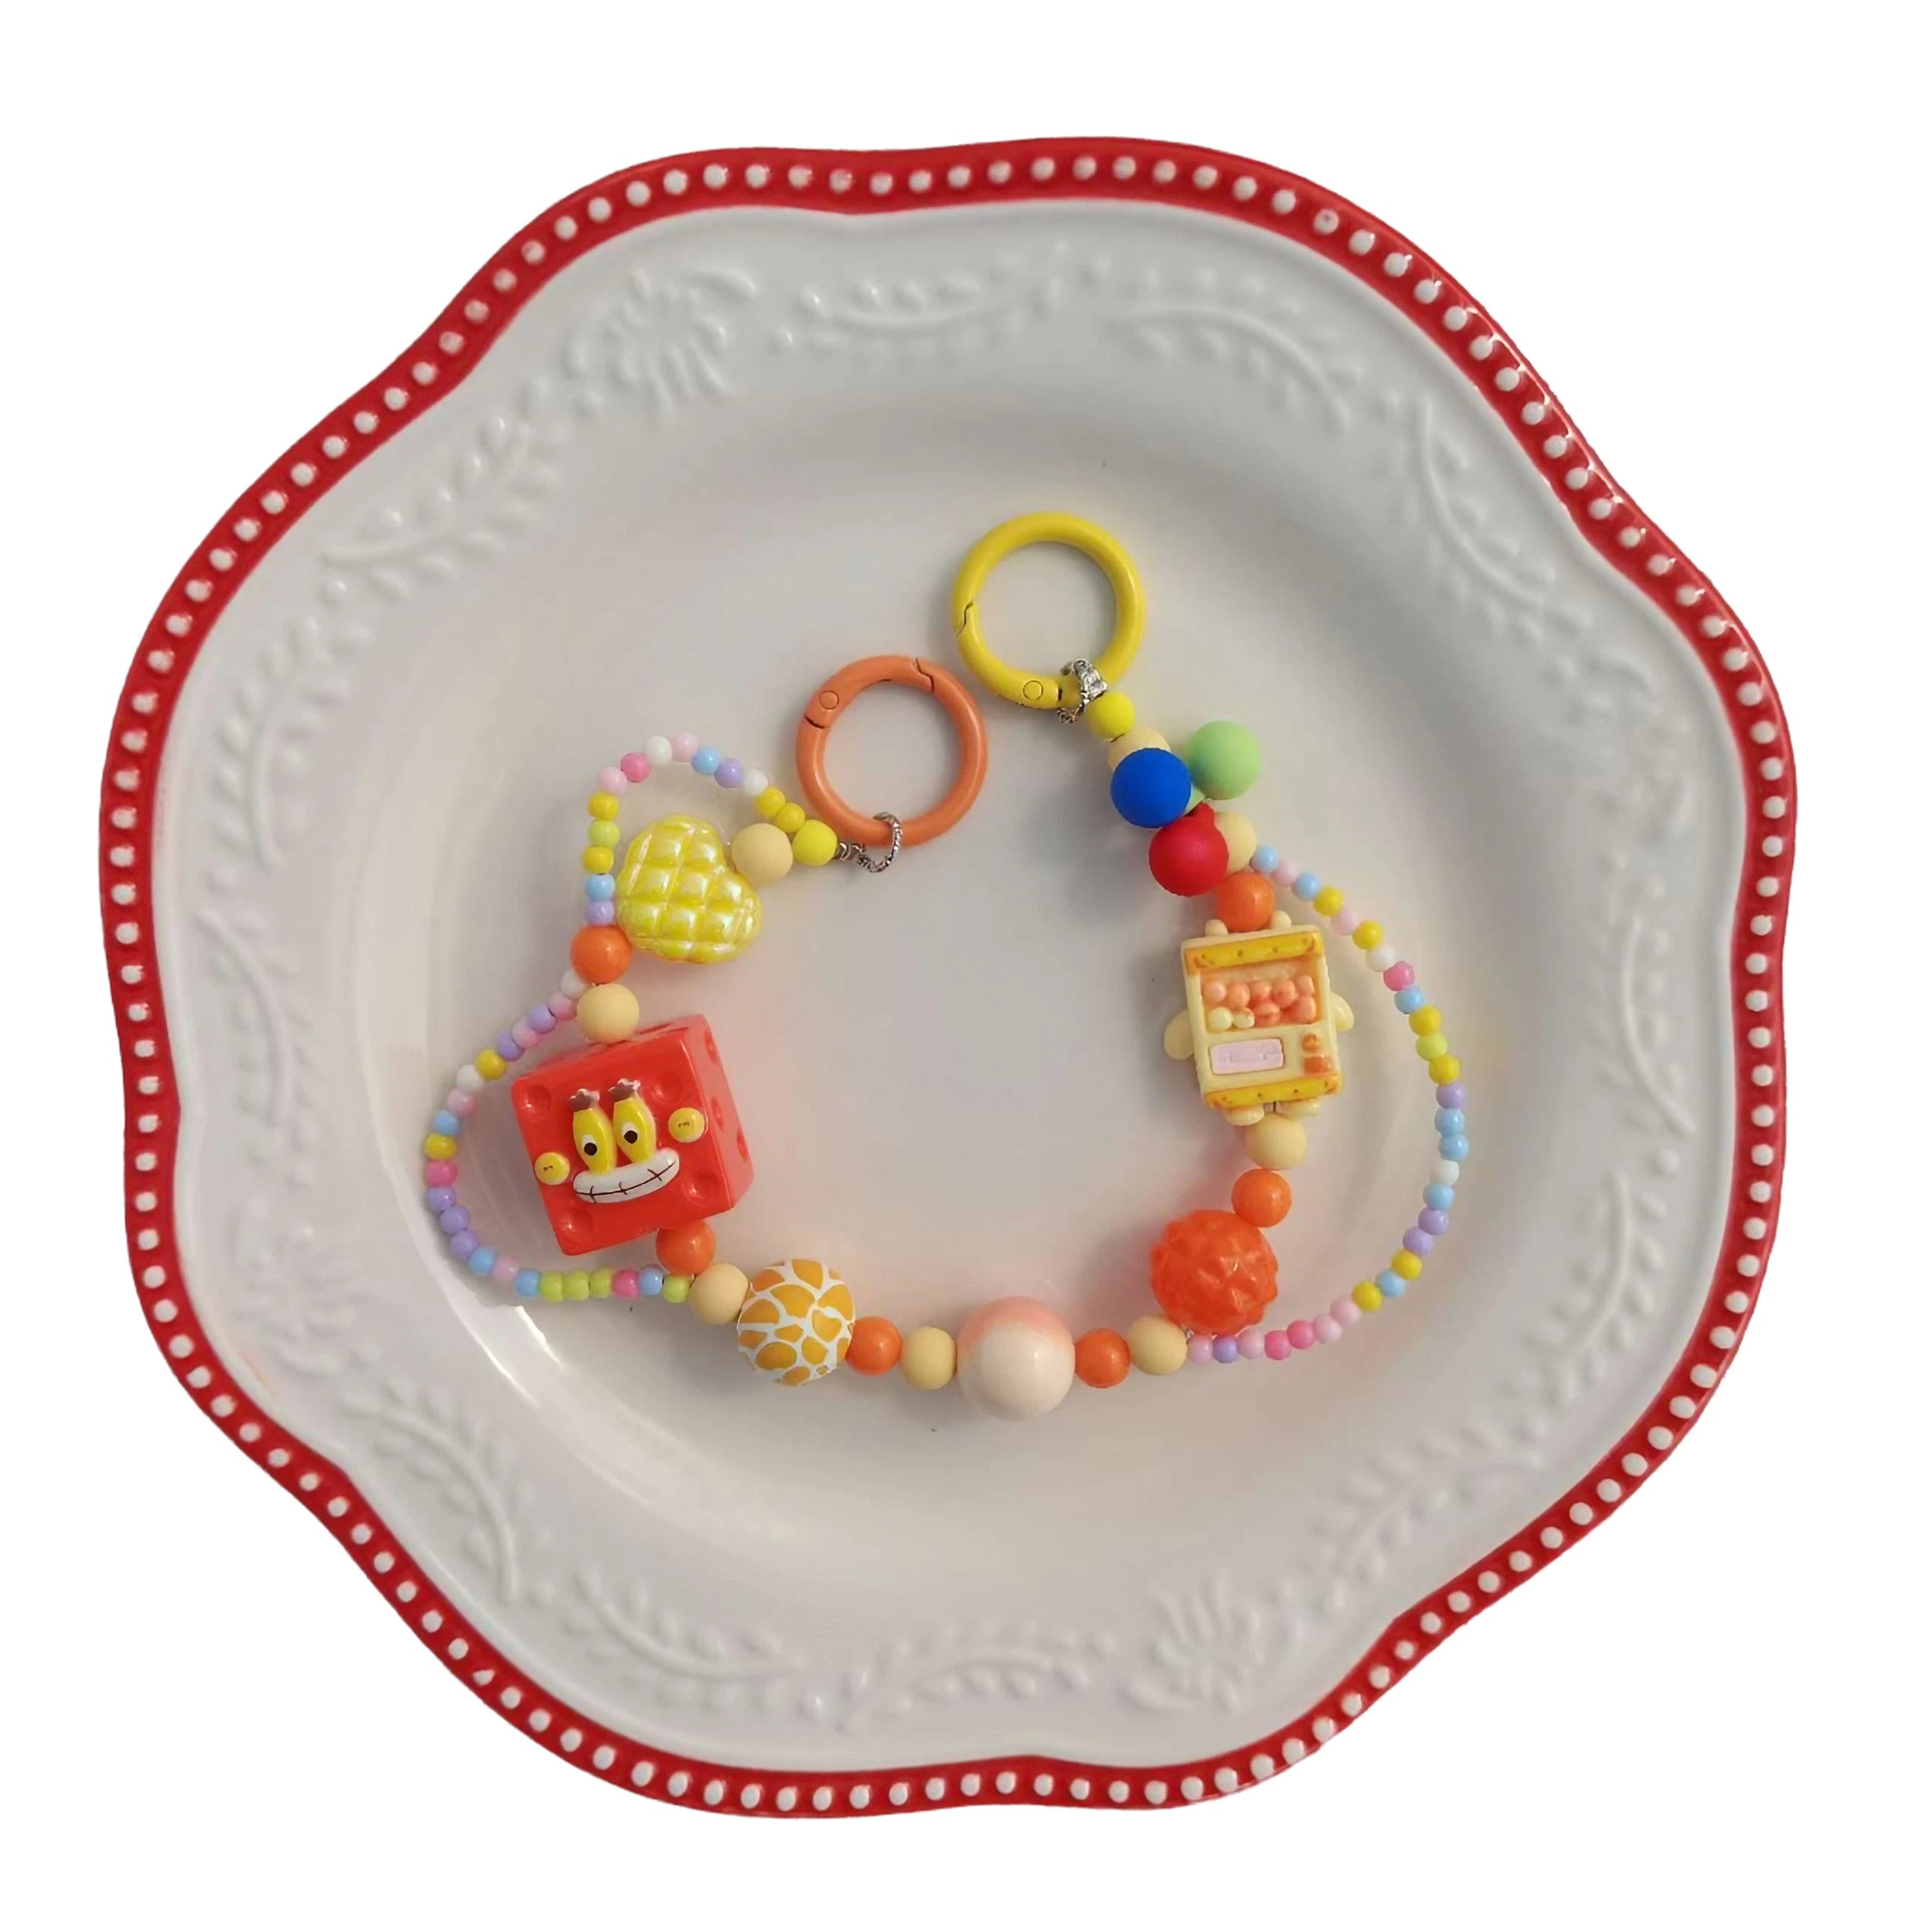 A decorative SpongeBob bag chain and beaded accessory presented on a plate